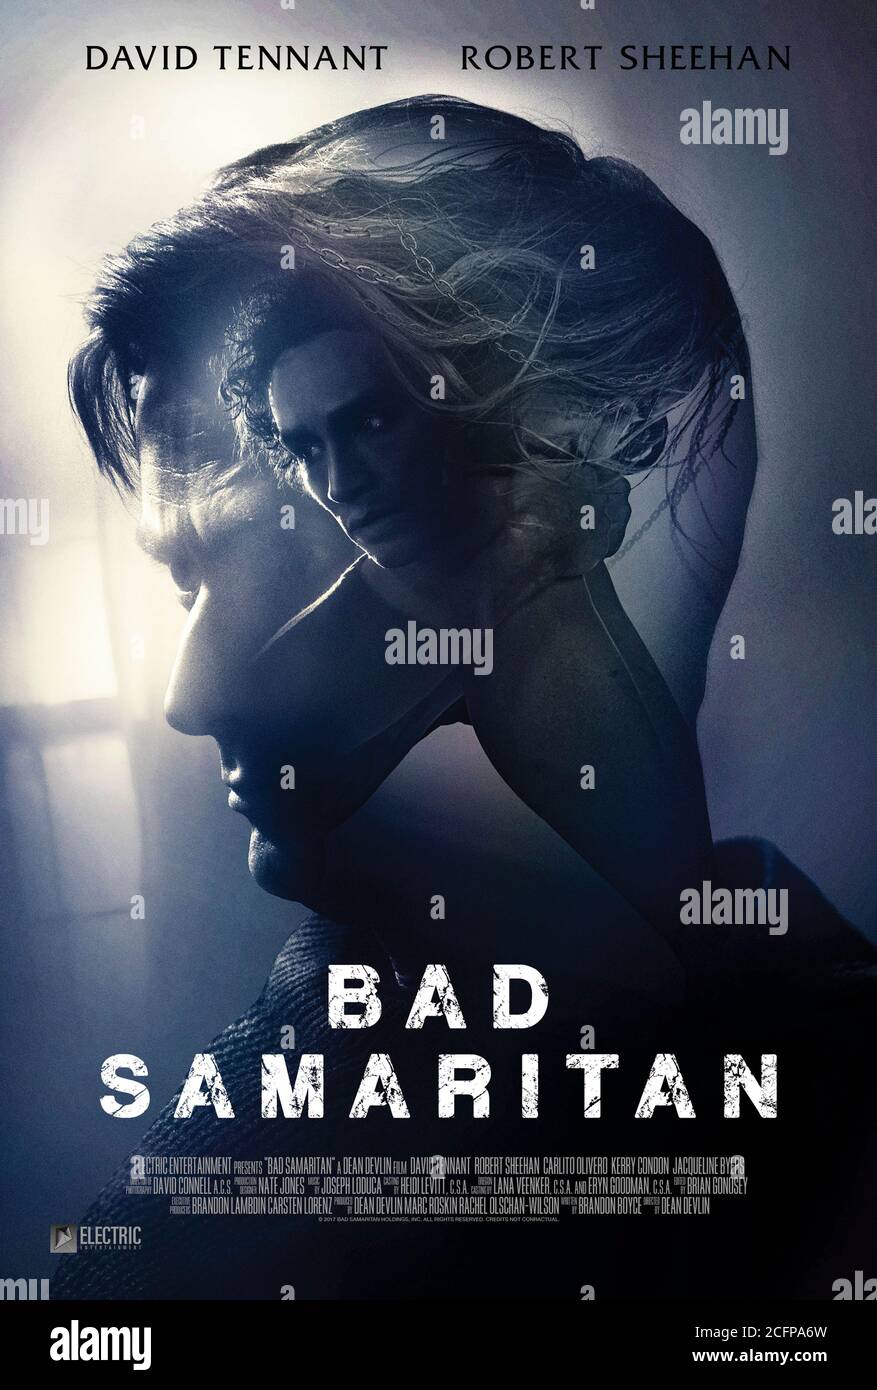 https://c8.alamy.com/comp/2CFPA6W/bad-samaritan-2018-directed-by-dean-devlin-and-starring-david-tennant-robert-sheehan-carlito-olivero-and-kerry-condon-burgulars-enter-a-house-and-discover-a-woman-tied-and-gagged-in-a-chair-2CFPA6W.jpg